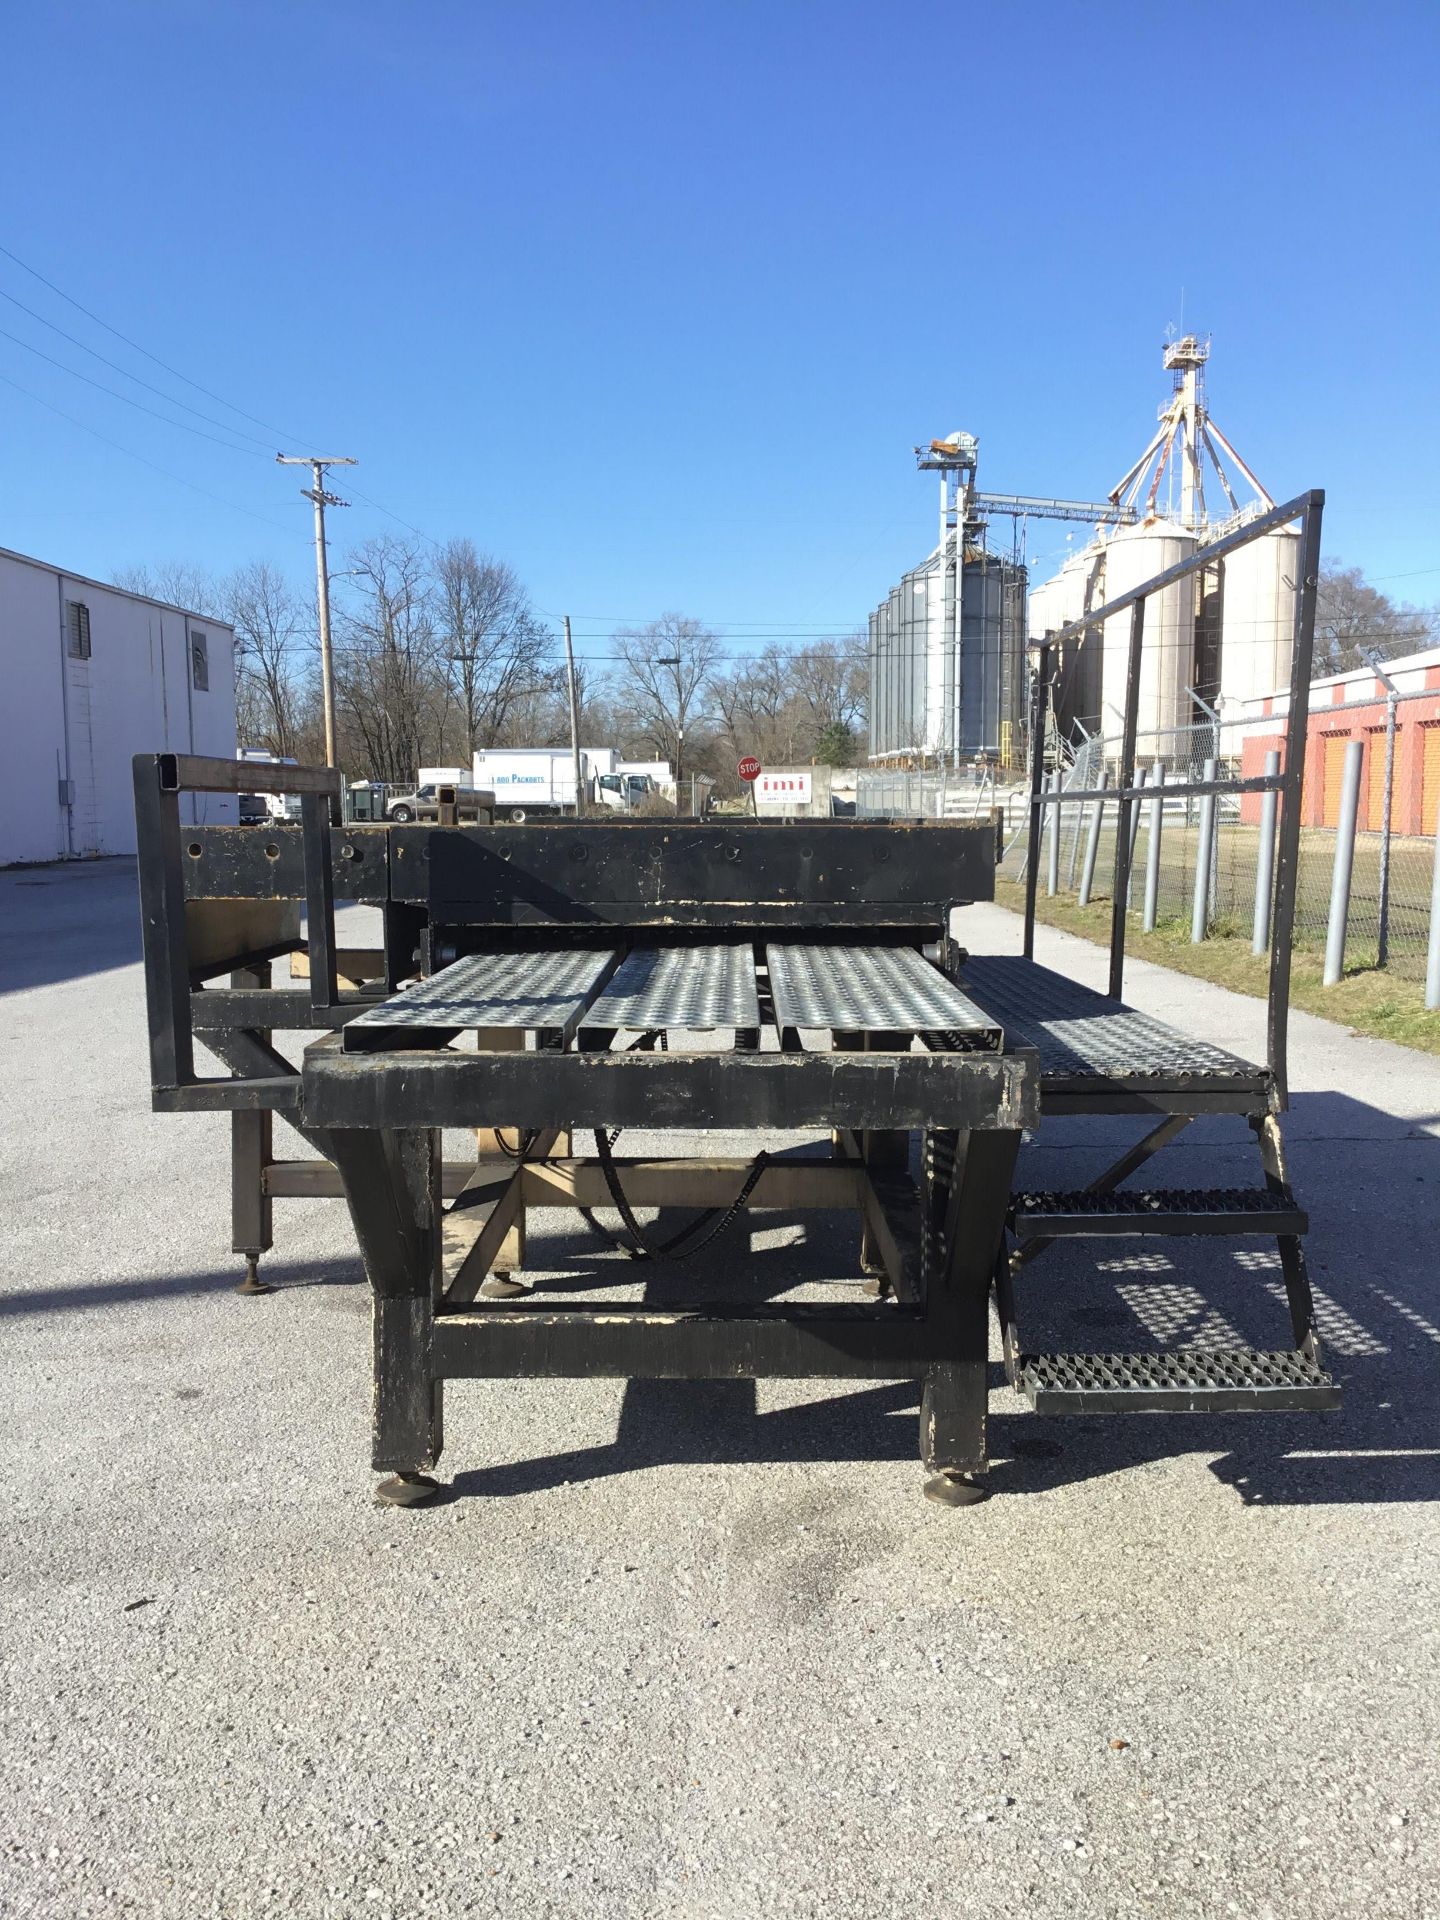 *LOCATED TULLAHOMA, TN* Adjustable Die-Changing Conveyor Table, Dimensions: 71" L x 106" W x 62" H - Image 3 of 6